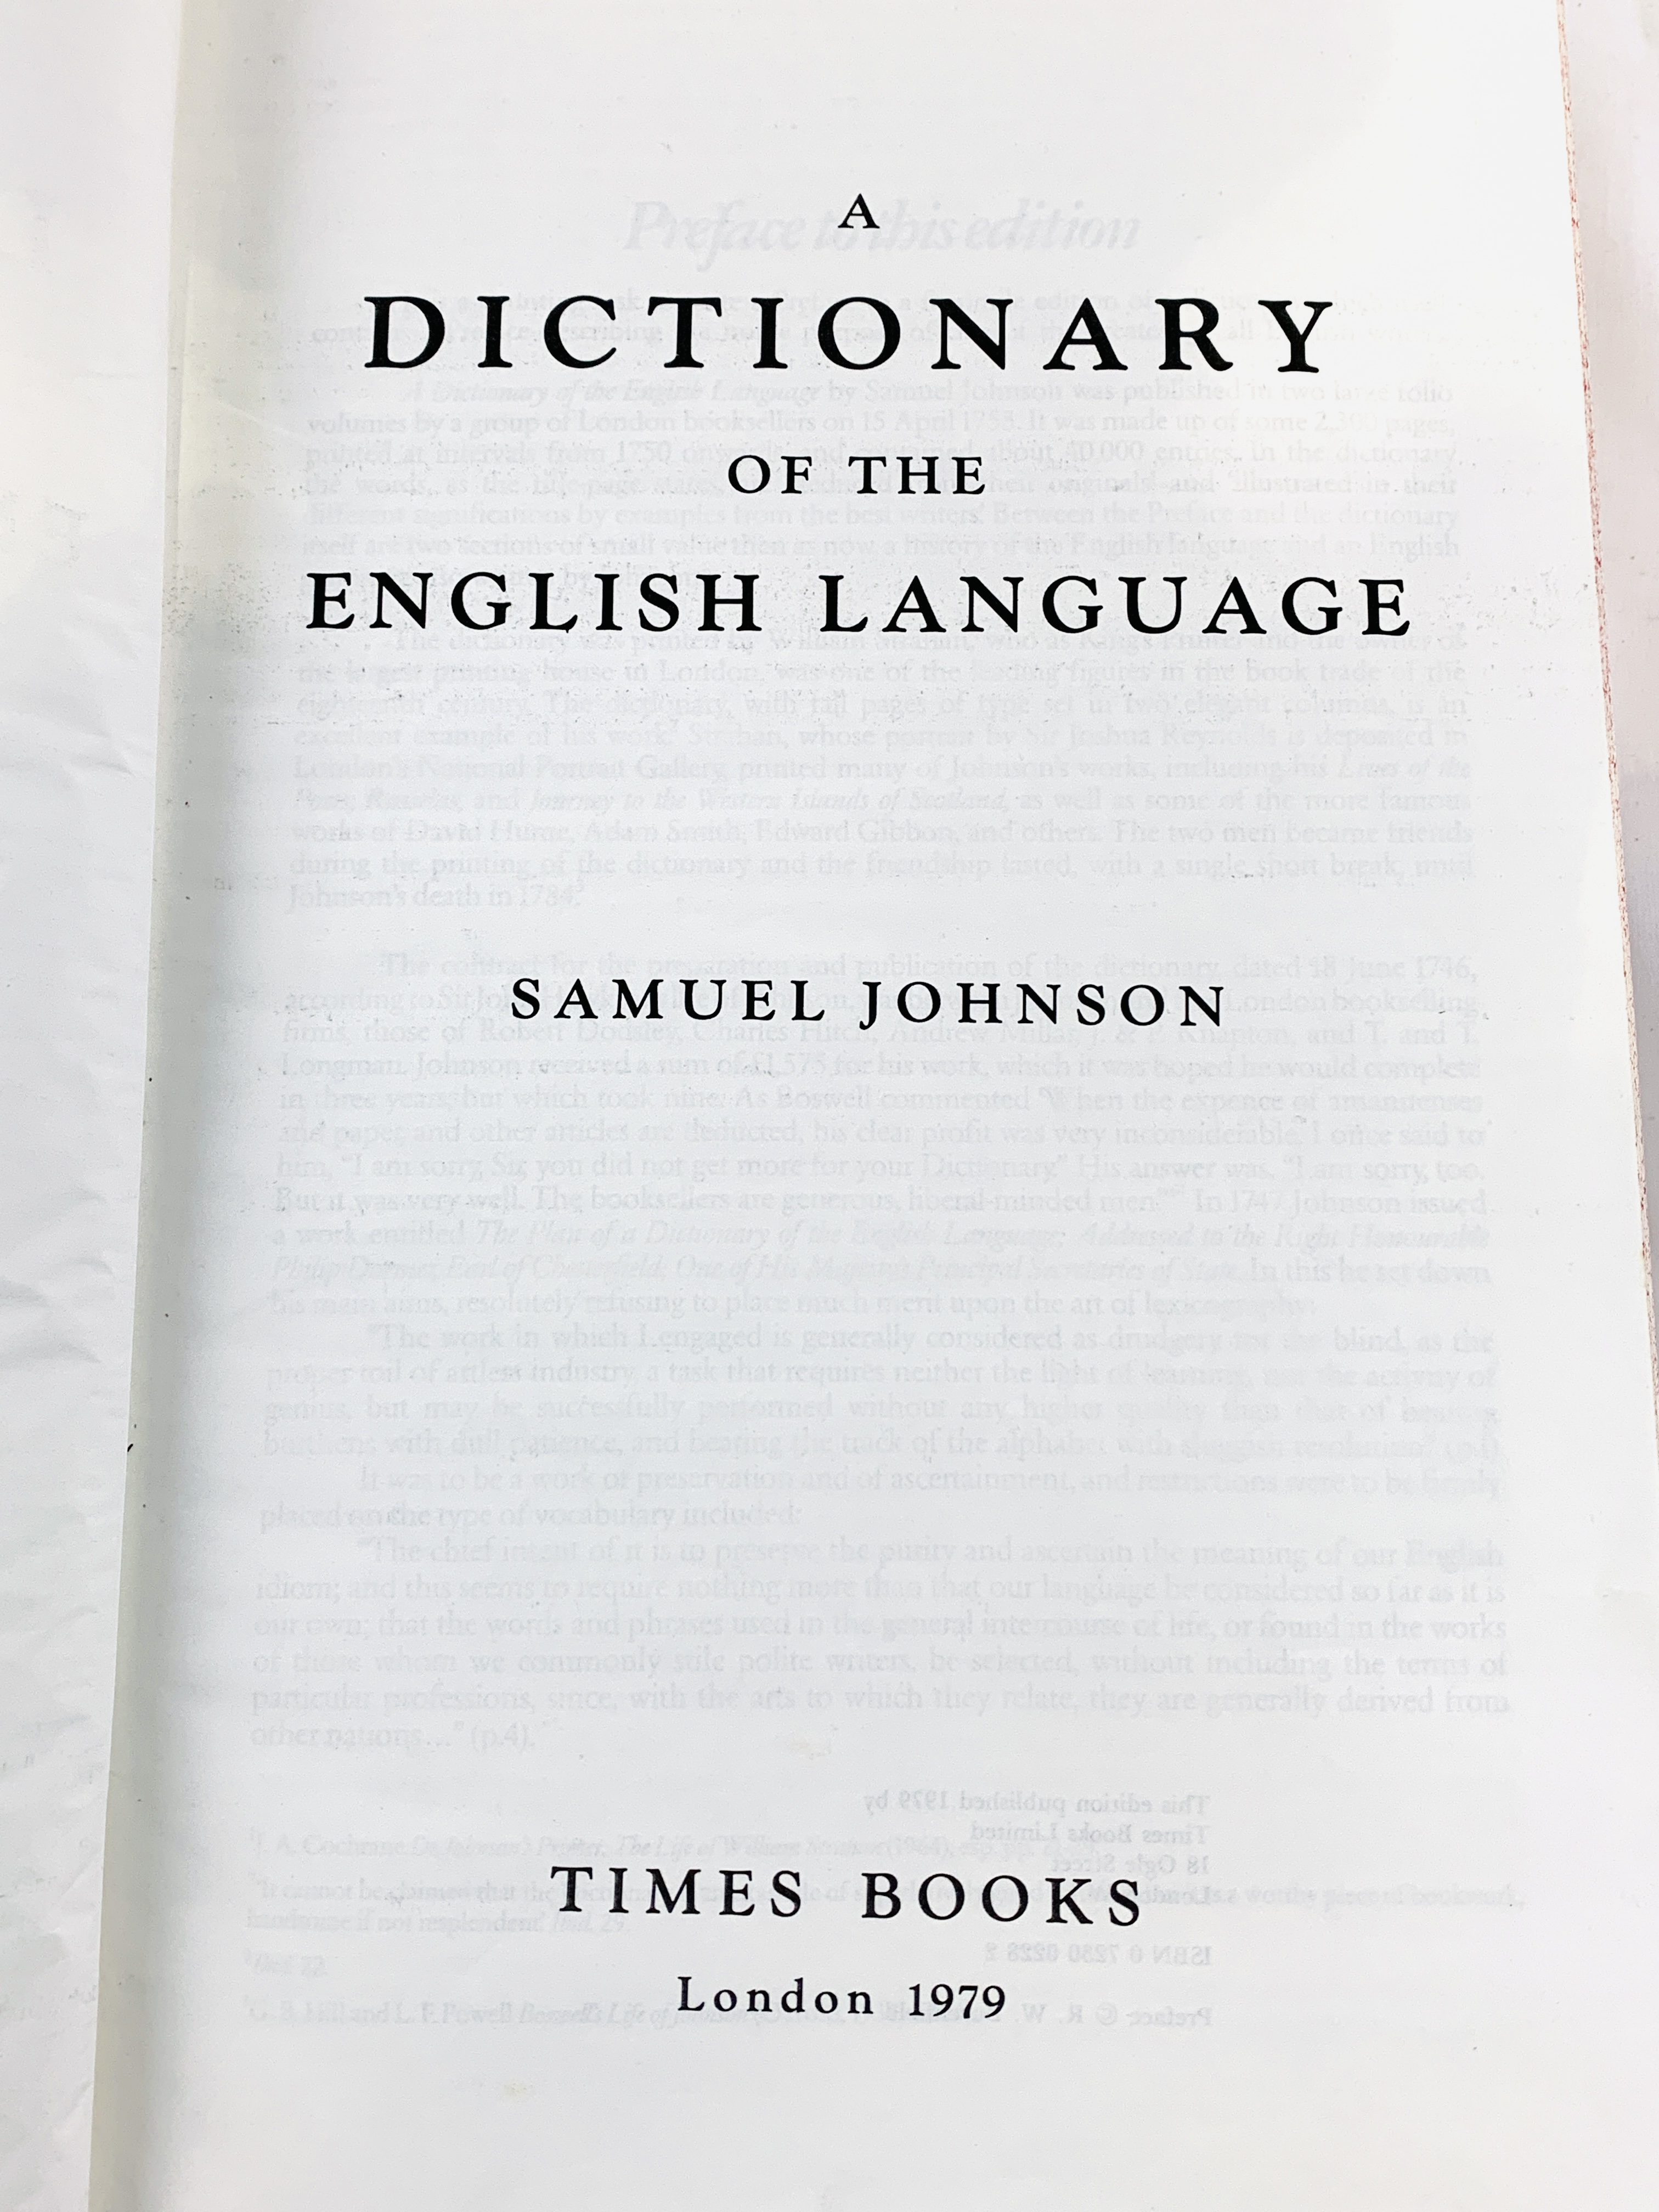 Dictionary of the English Language by Samuel Johnson by Times Books 1979 - Image 3 of 4